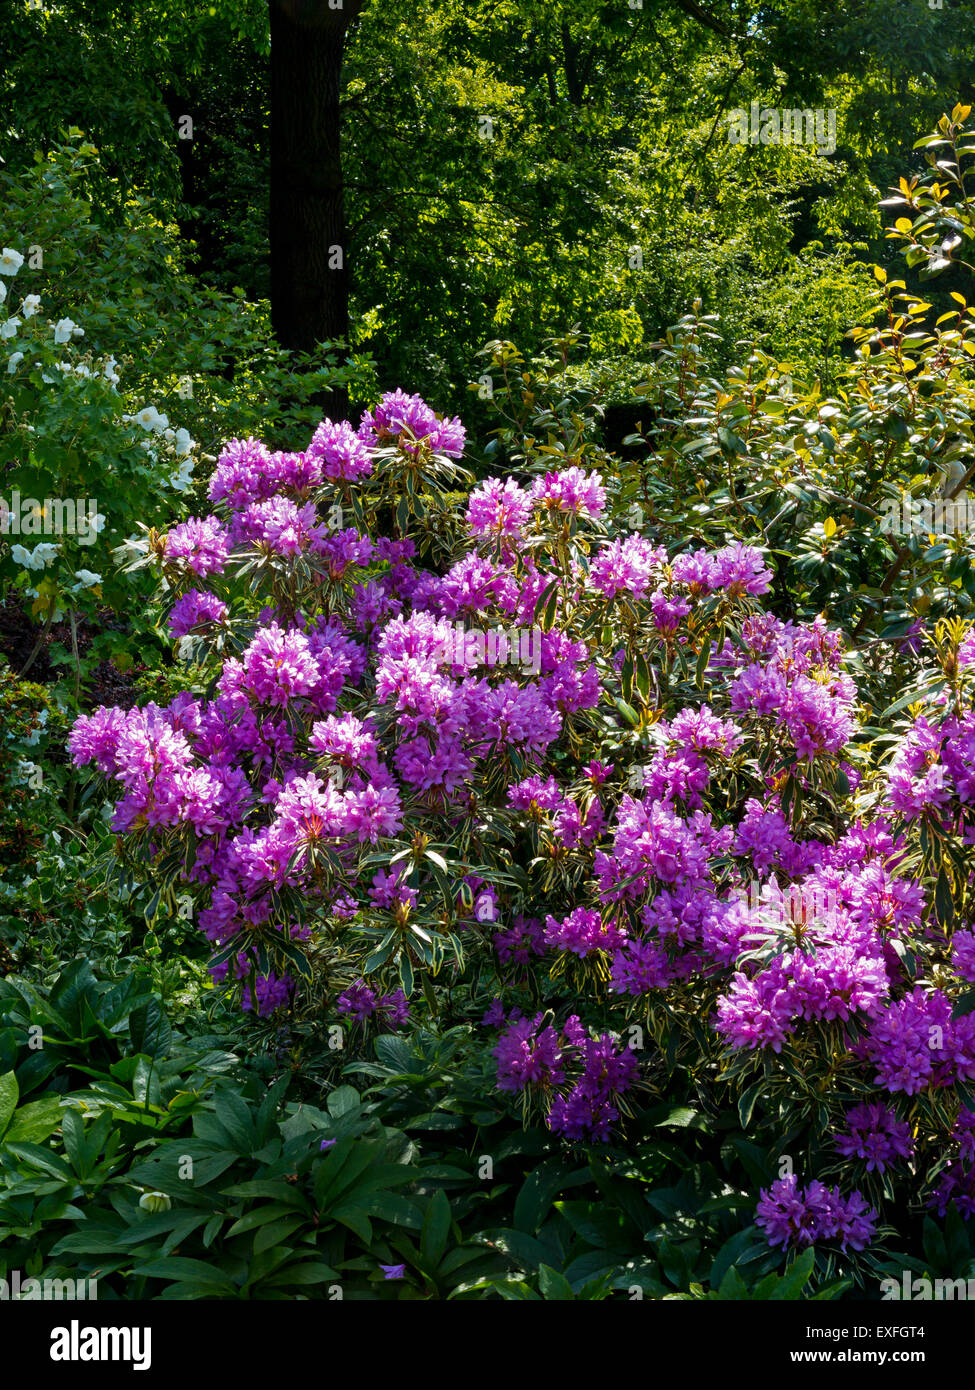 Rhododendrons growing in the garden at Renishaw Hall Derbyshire England UK Stock Photo